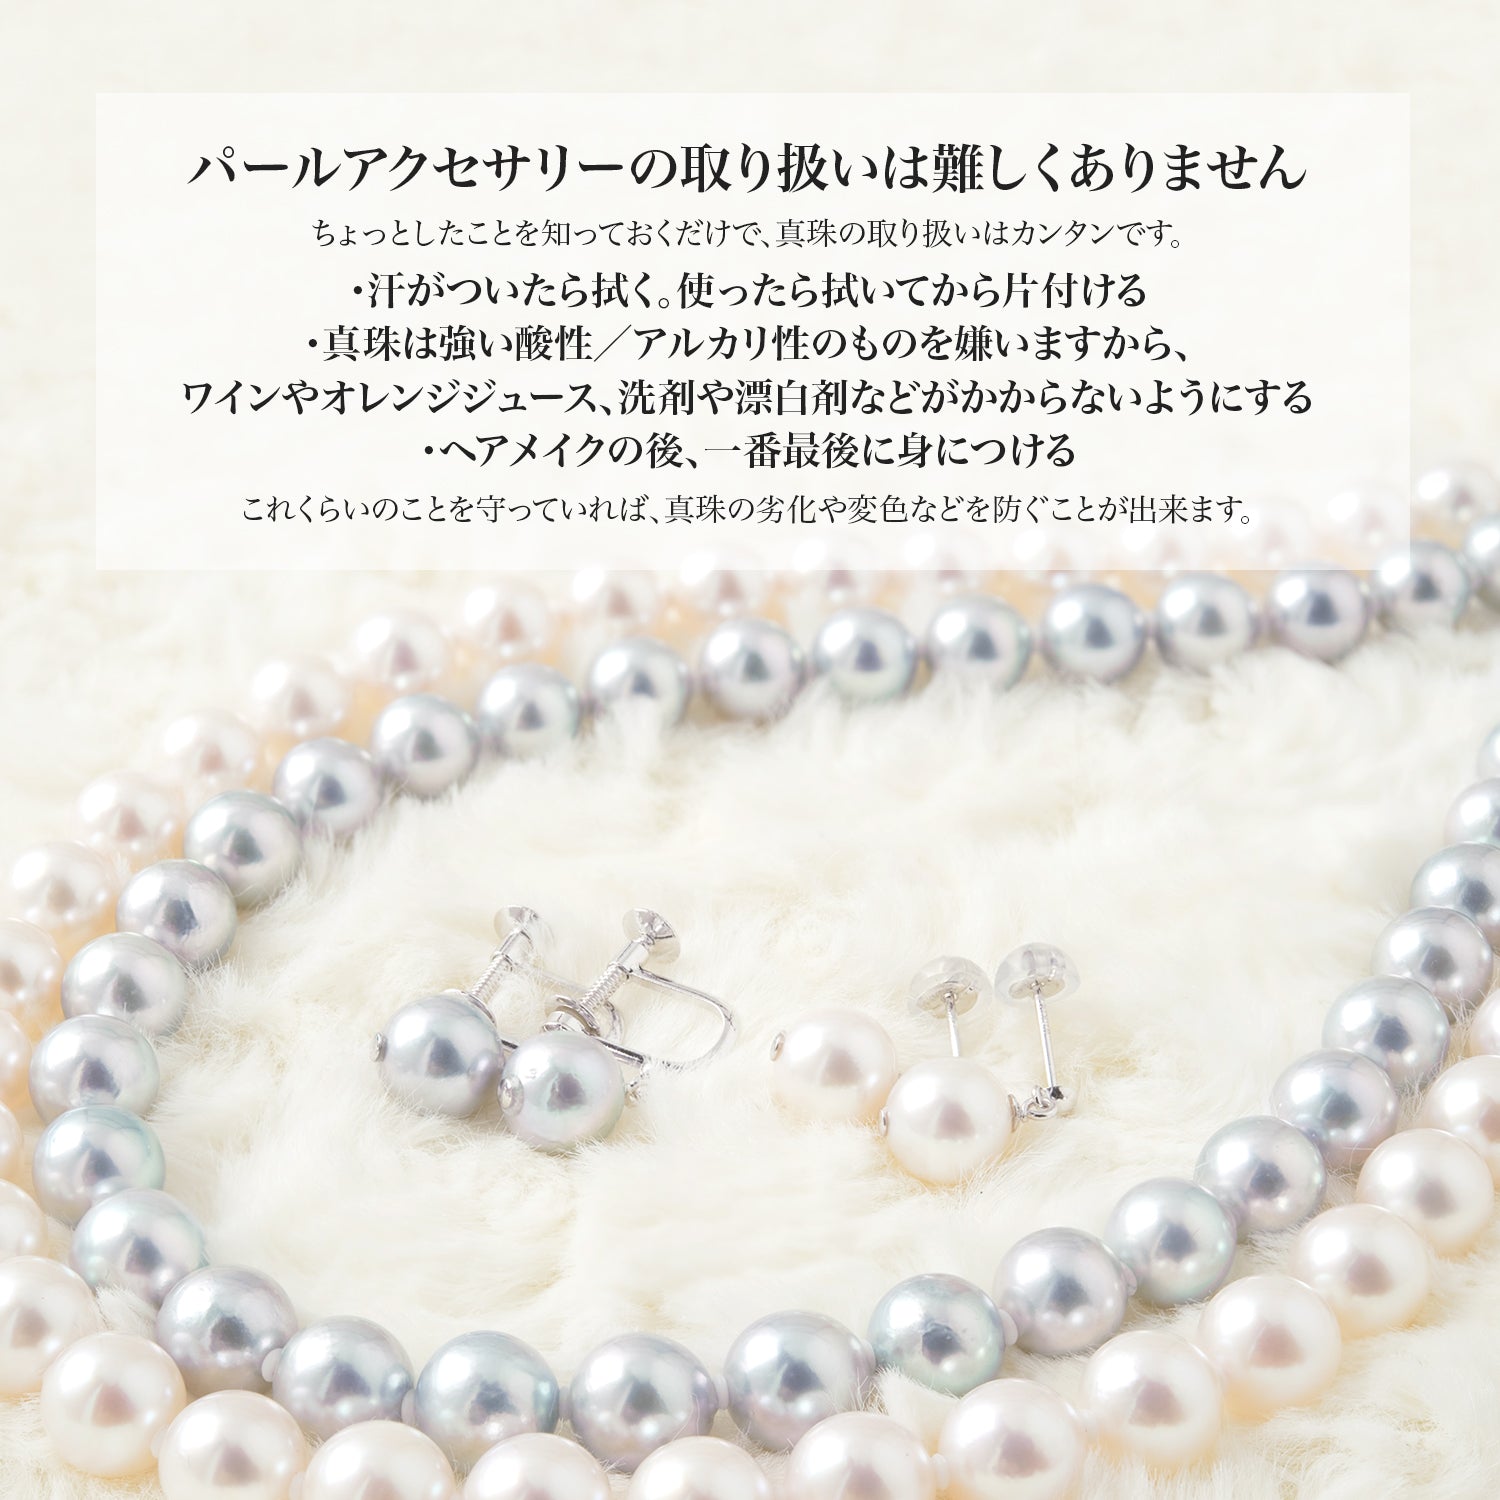 Akoya Pearl Polar Bear Peace Pearl Necklace [9.0mm] Official Goods Silver SV925 Venetian Chain Ehime Prefectural Tobe Zoo Collaboration Certificate of Origin Storage Case Included (4022)